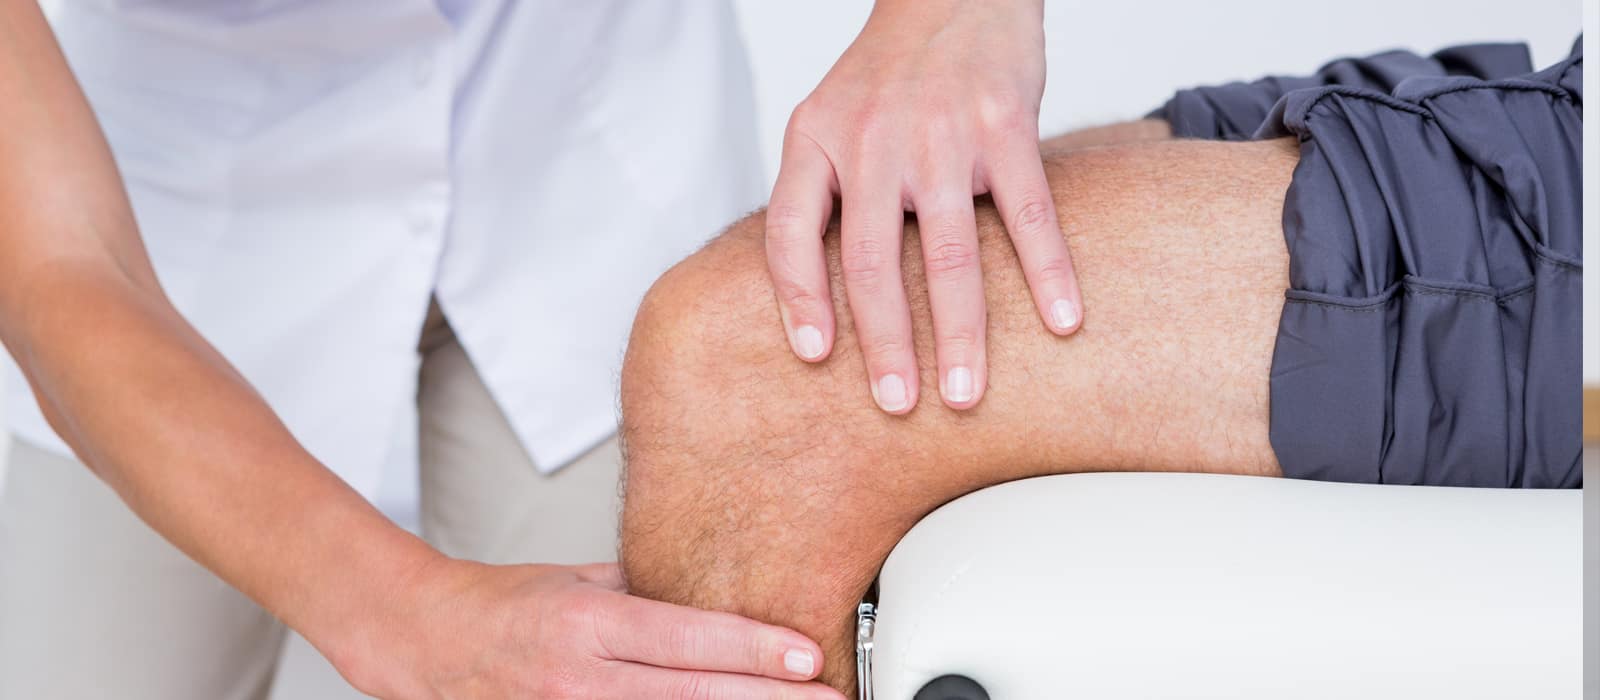 Knee pain treatment Singapore without surgery